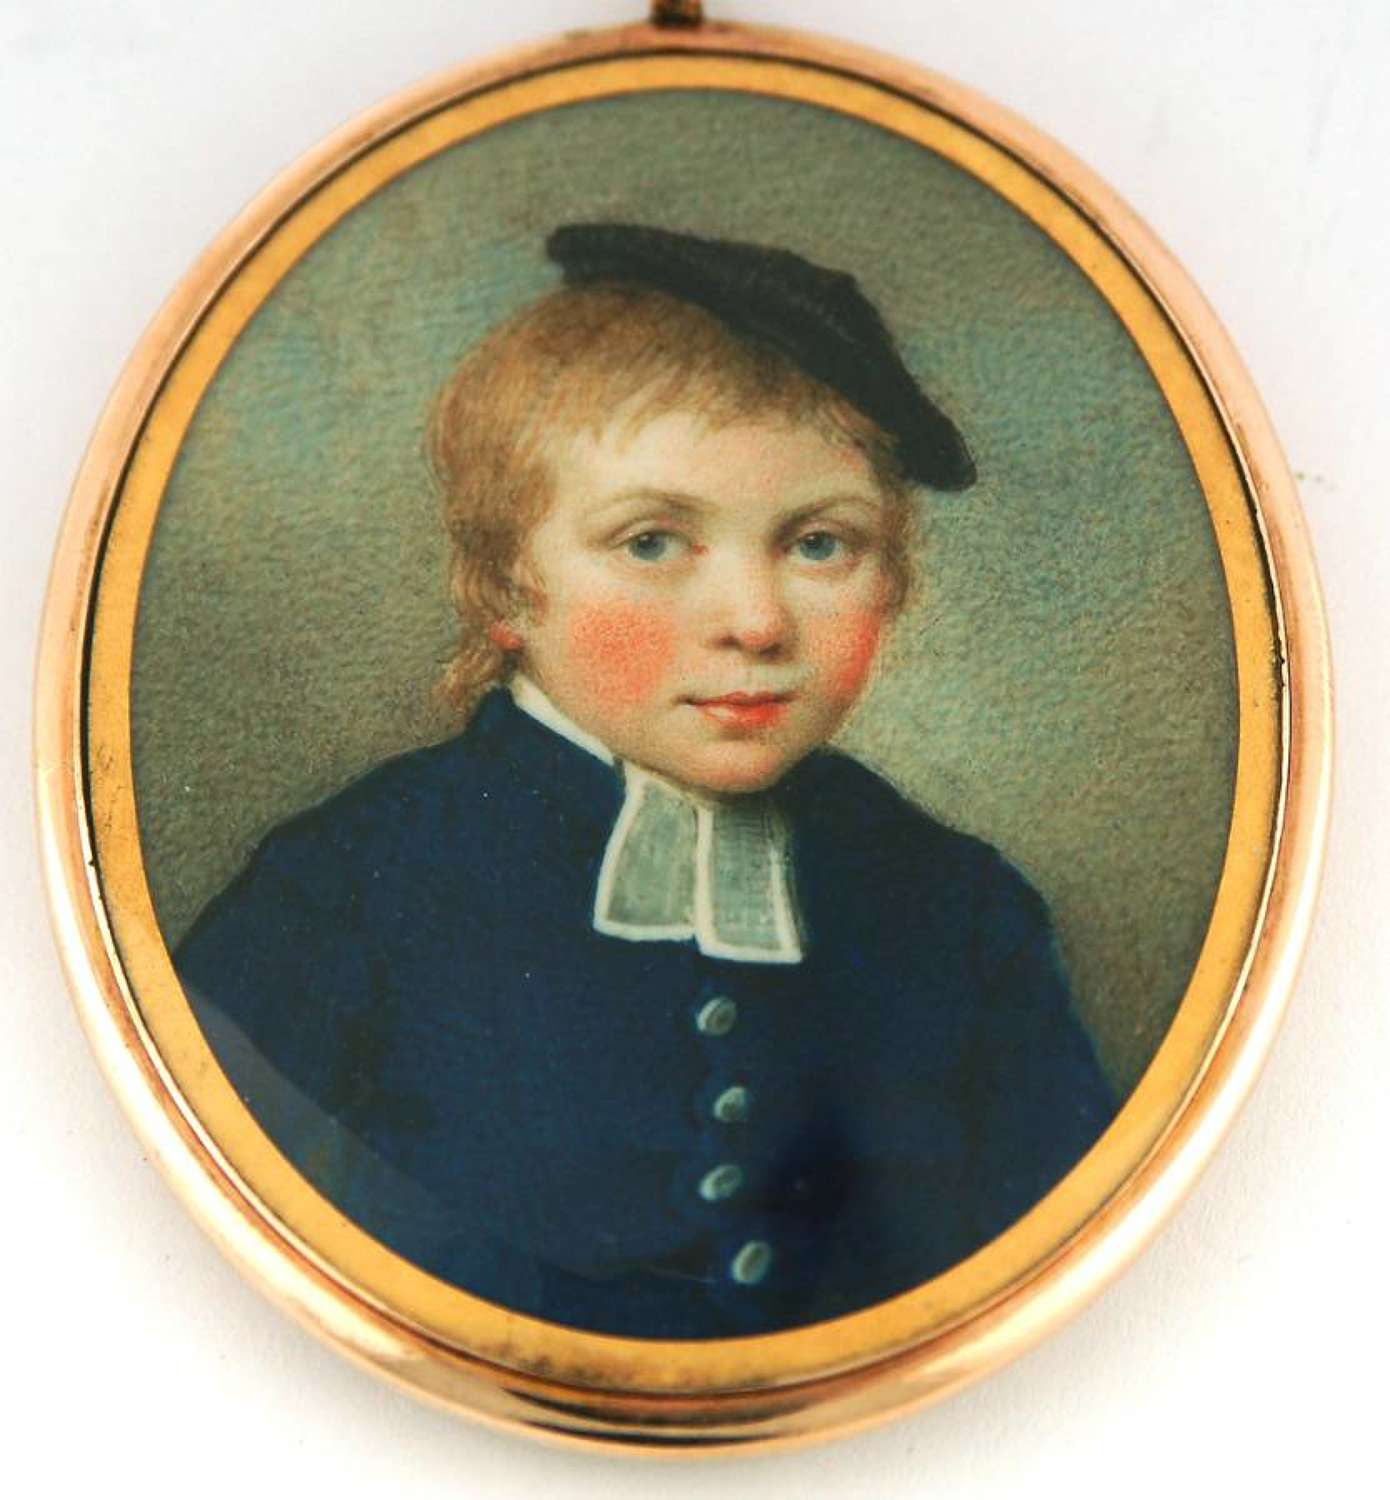 Boy with hat